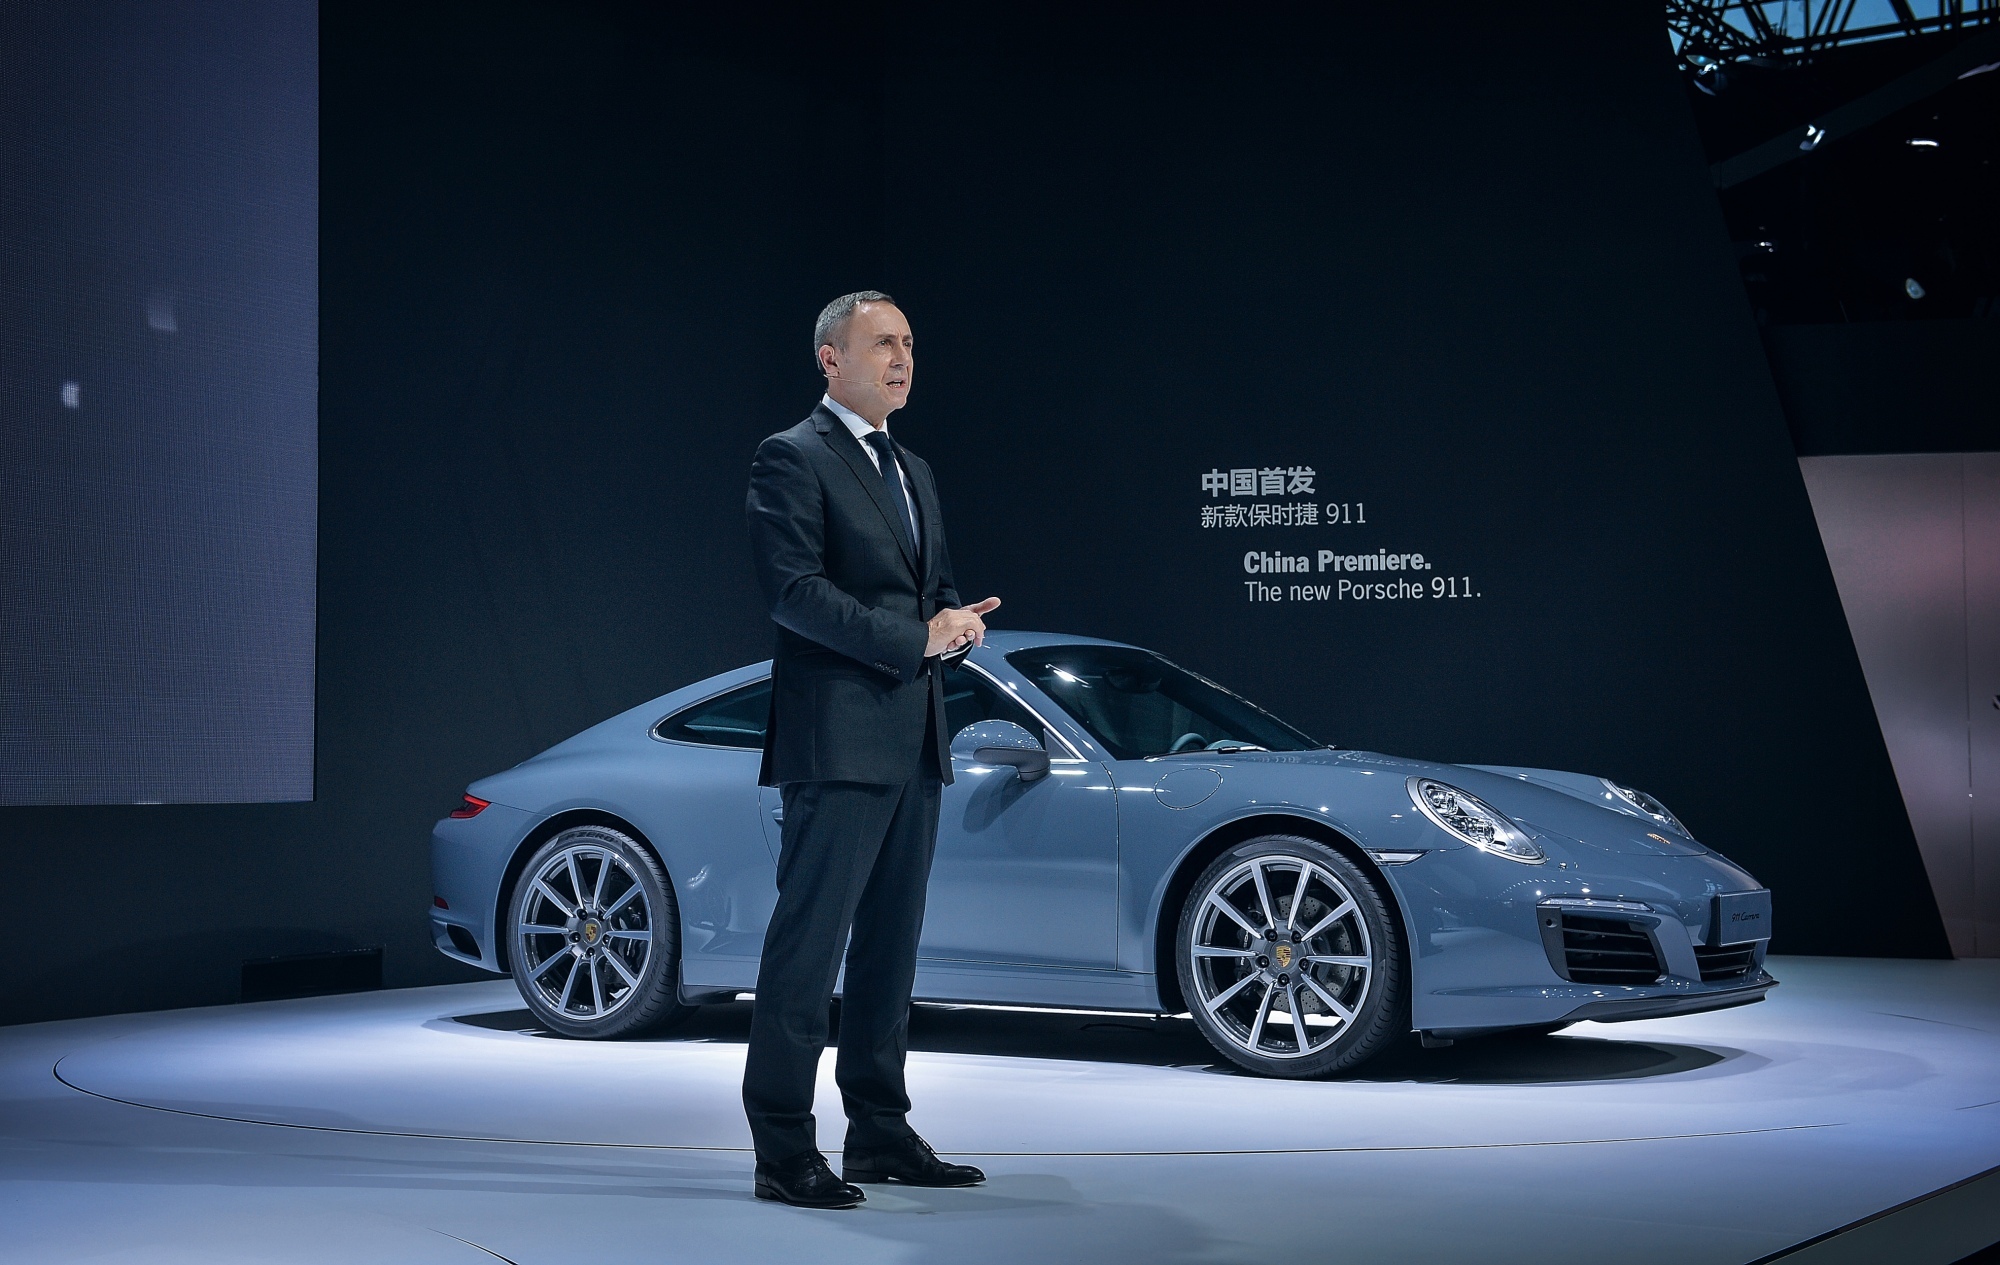 Don't see India as an emerging market anymore: Porsche